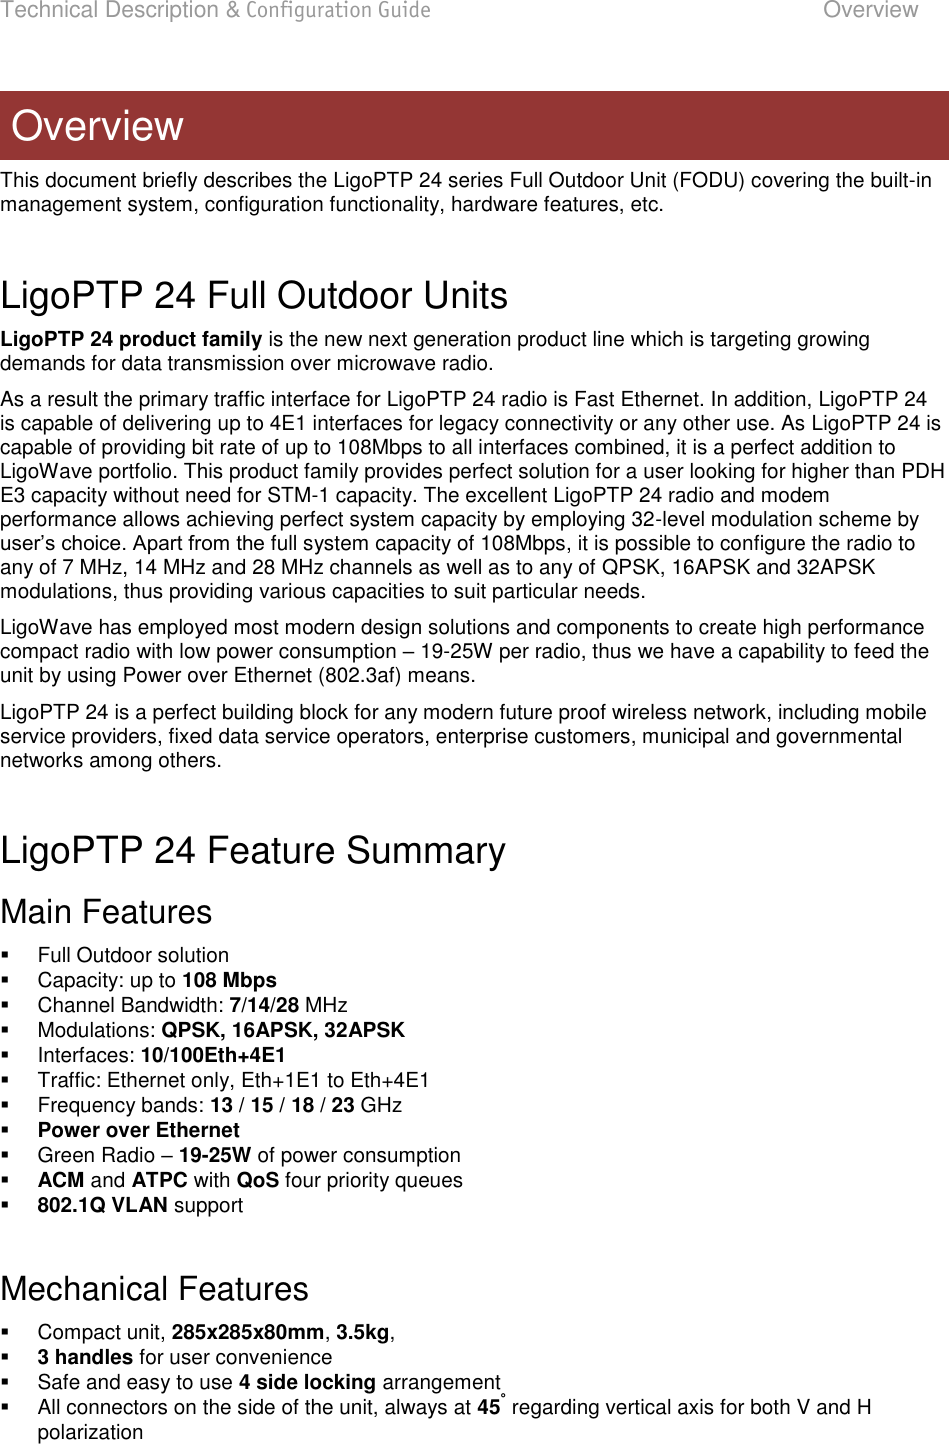 Technical Description &amp; Configuration Guide  Overview  LigoWave  Page 5 This document briefly describes the LigoPTP 24 series Full Outdoor Unit (FODU) covering the built-in management system, configuration functionality, hardware features, etc.  LigoPTP 24 Full Outdoor Units LigoPTP 24 product family is the new next generation product line which is targeting growing demands for data transmission over microwave radio. As a result the primary traffic interface for LigoPTP 24 radio is Fast Ethernet. In addition, LigoPTP 24 is capable of delivering up to 4E1 interfaces for legacy connectivity or any other use. As LigoPTP 24 is capable of providing bit rate of up to 108Mbps to all interfaces combined, it is a perfect addition to LigoWave portfolio. This product family provides perfect solution for a user looking for higher than PDH E3 capacity without need for STM-1 capacity. The excellent LigoPTP 24 radio and modem performance allows achieving perfect system capacity by employing 32-level modulation scheme by full system capacity of 108Mbps, it is possible to configure the radio to any of 7 MHz, 14 MHz and 28 MHz channels as well as to any of QPSK, 16APSK and 32APSK modulations, thus providing various capacities to suit particular needs. LigoWave has employed most modern design solutions and components to create high performance compact radio with low power consumption  19-25W per radio, thus we have a capability to feed the unit by using Power over Ethernet (802.3af) means. LigoPTP 24 is a perfect building block for any modern future proof wireless network, including mobile service providers, fixed data service operators, enterprise customers, municipal and governmental networks among others.  LigoPTP 24 Feature Summary  Main Features   Full Outdoor solution   Capacity: up to 108 Mbps   Channel Bandwidth: 7/14/28 MHz   Modulations: QPSK, 16APSK, 32APSK   Interfaces: 10/100Eth+4E1   Traffic: Ethernet only, Eth+1E1 to Eth+4E1   Frequency bands: 13 / 15 / 18 / 23 GHz  Power over Ethernet   Green Radio  19-25W of power consumption  ACM and ATPC with QoS four priority queues  802.1Q VLAN support  Mechanical Features   Compact unit, 285x285x80mm, 3.5kg,   3 handles for user convenience   Safe and easy to use 4 side locking arrangement   All connectors on the side of the unit, always at 45° regarding vertical axis for both V and H polarization Overview 